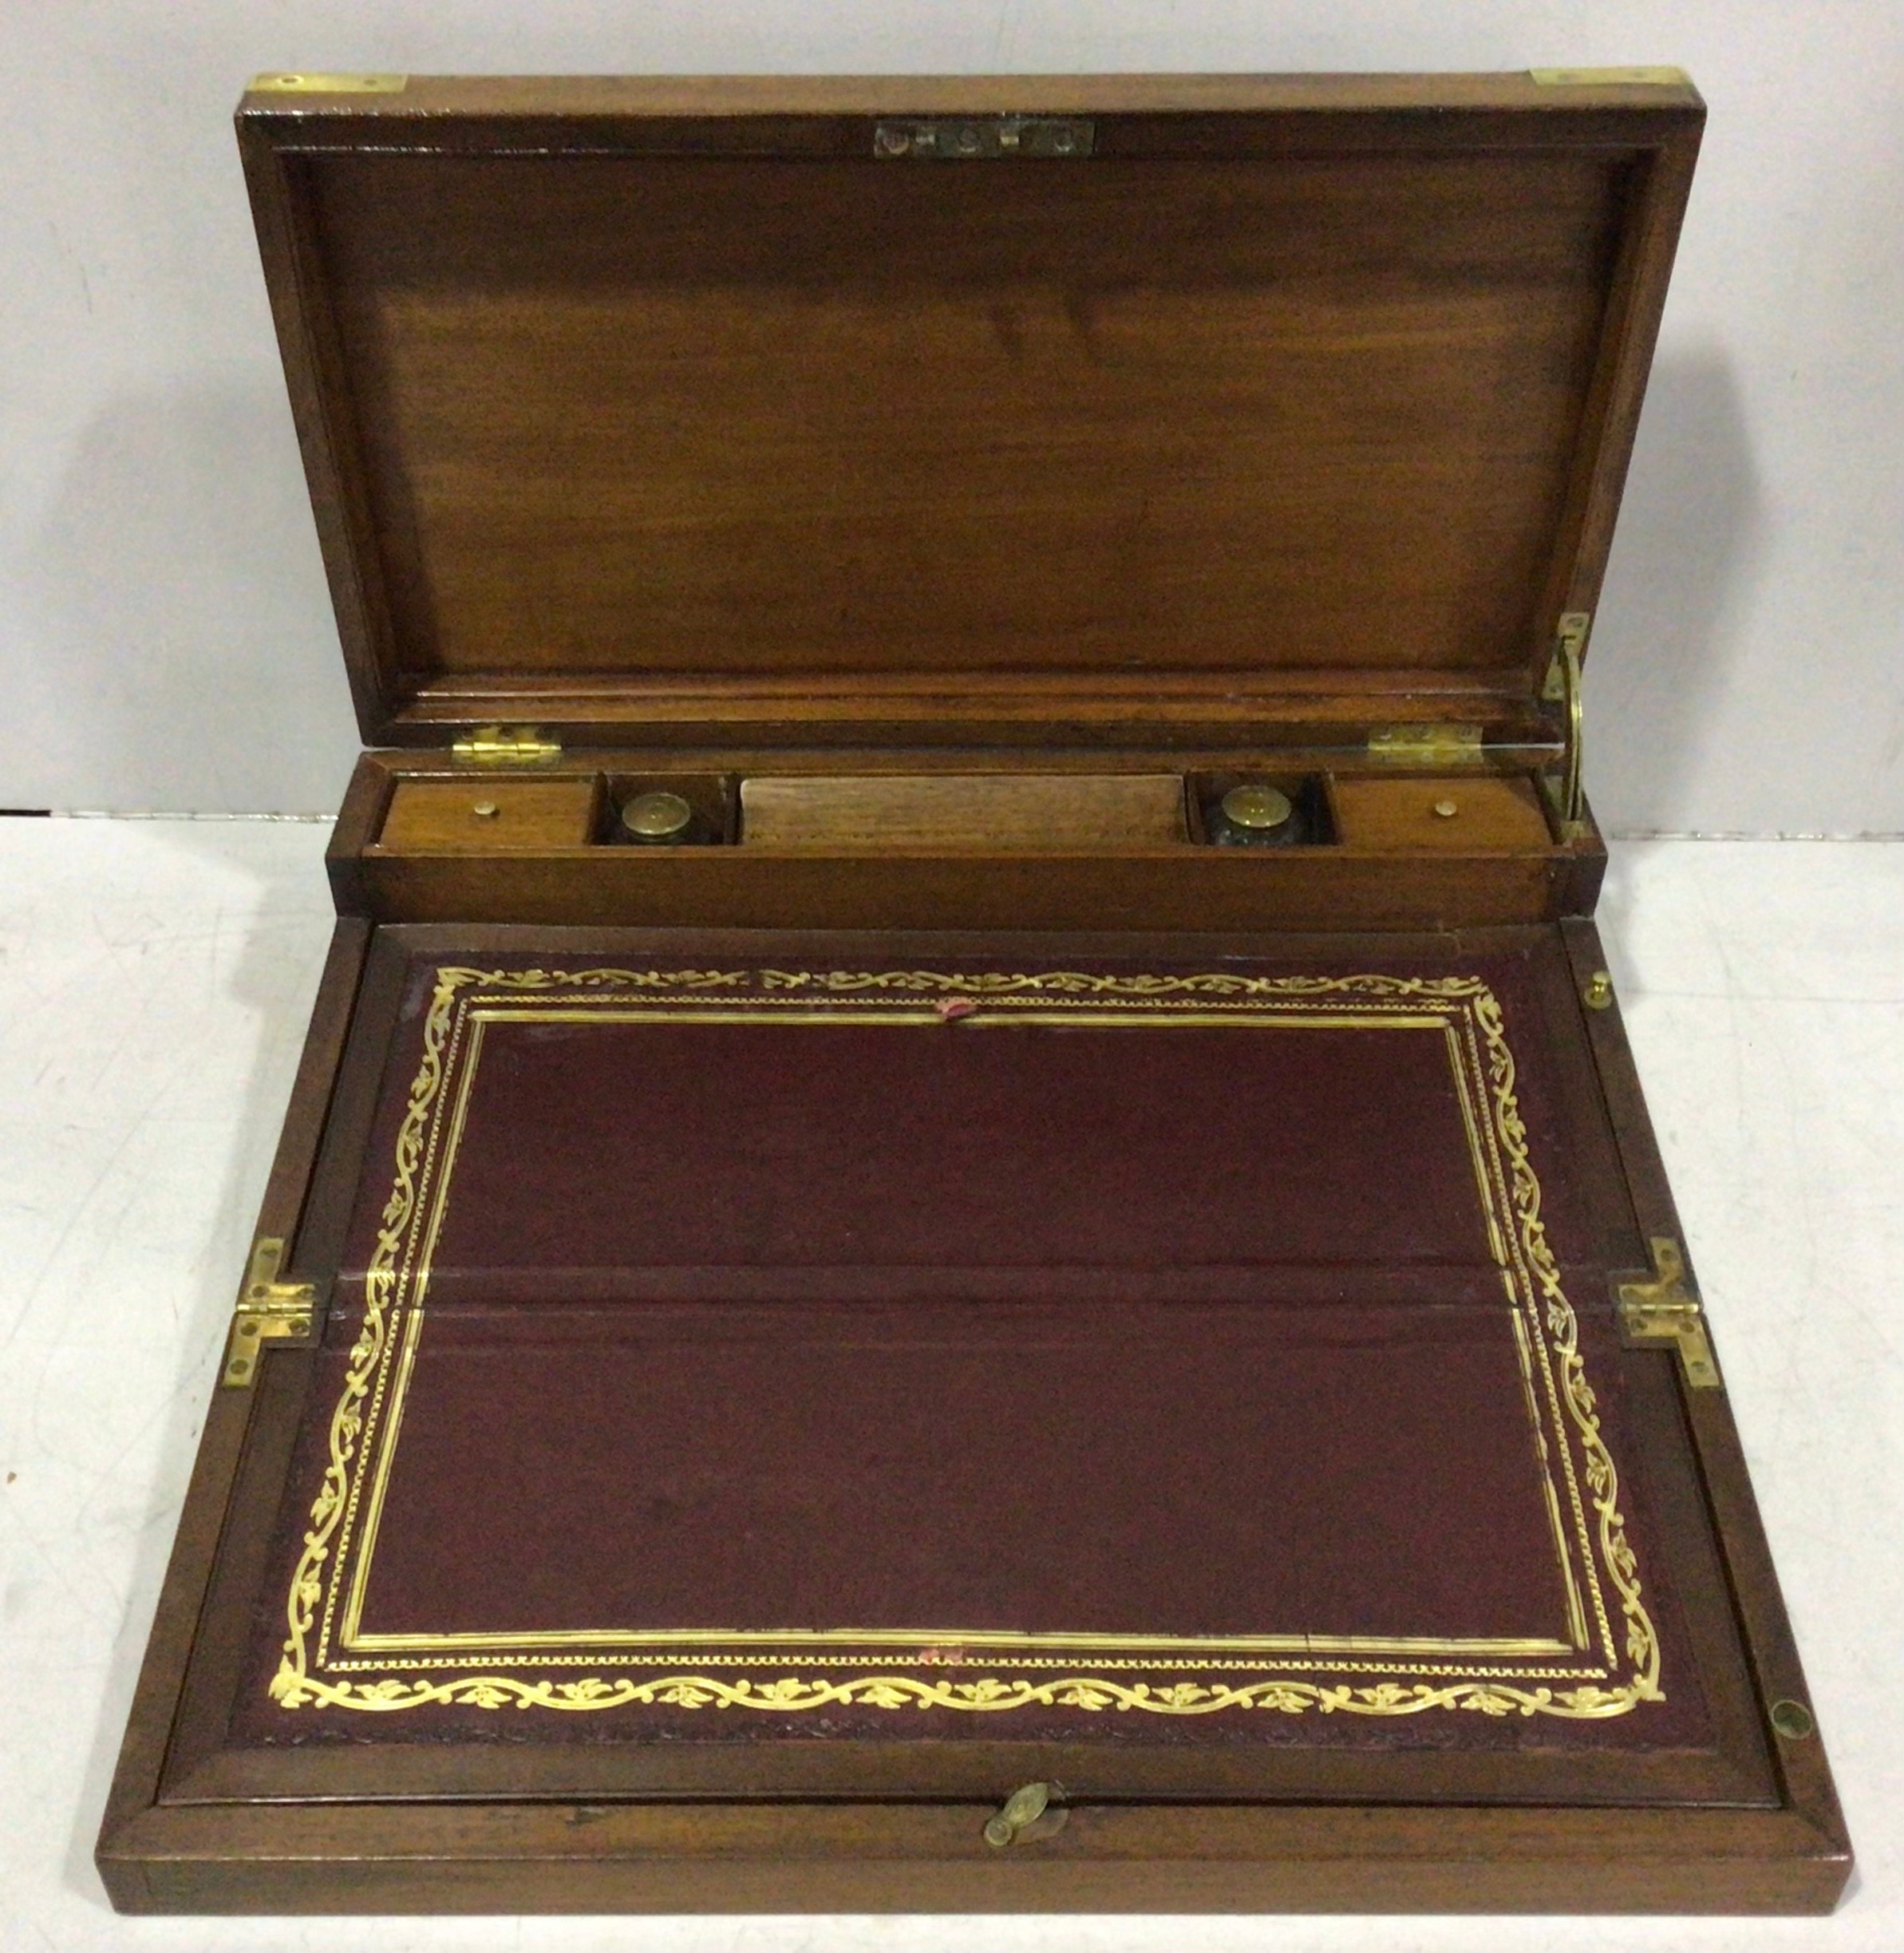 A Regency Campaign-style brass-bound mahogany 'Tompson Patent' writing slope, the hinged rectangular